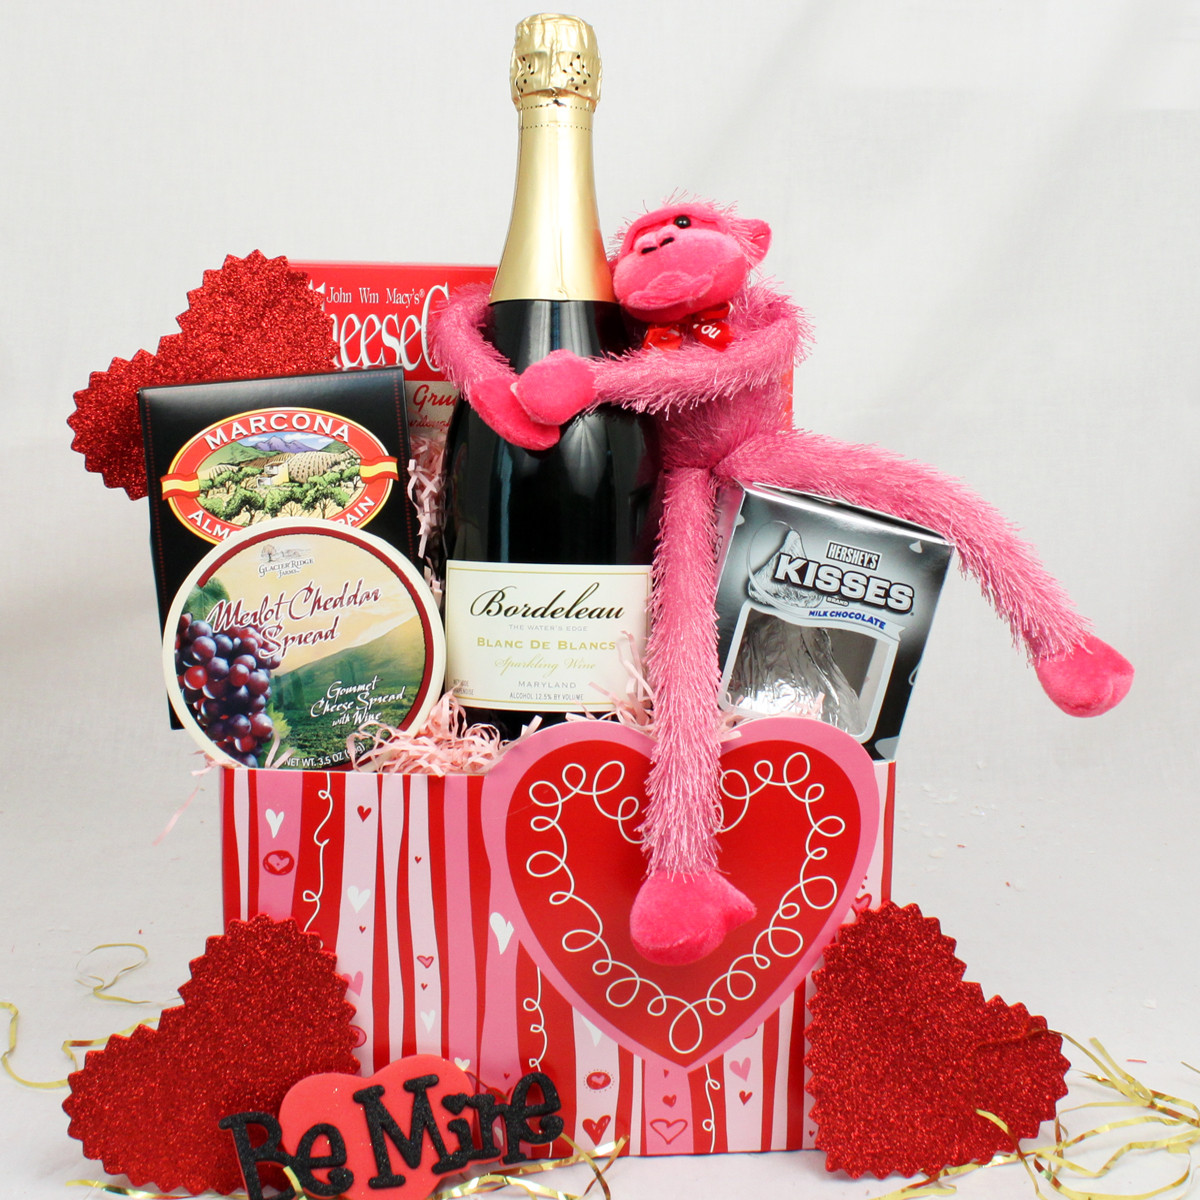 Creative Valentine Day Gift Ideas
 Creative and Thoughtful Valentine’s Day Gifts for Her